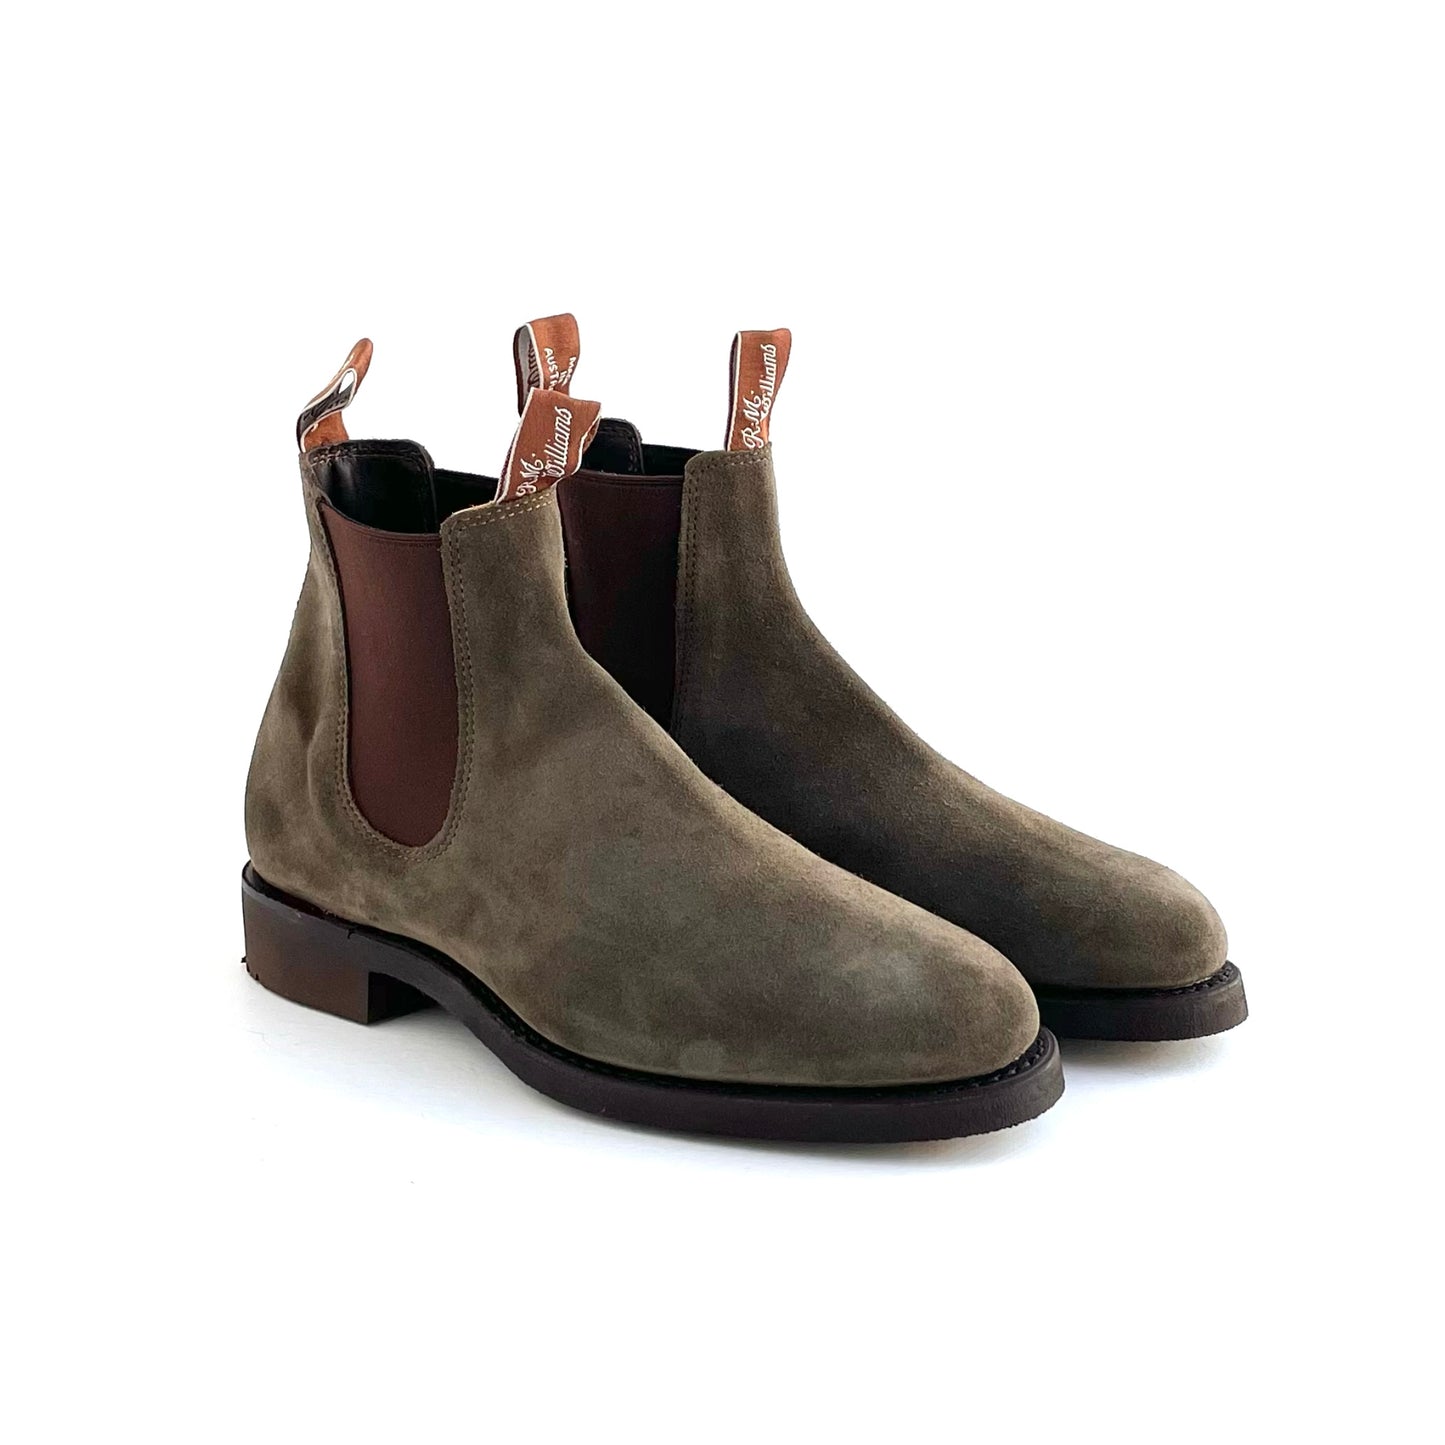 RM WILLIAMS SIDE GORE BOOTS SUEDE